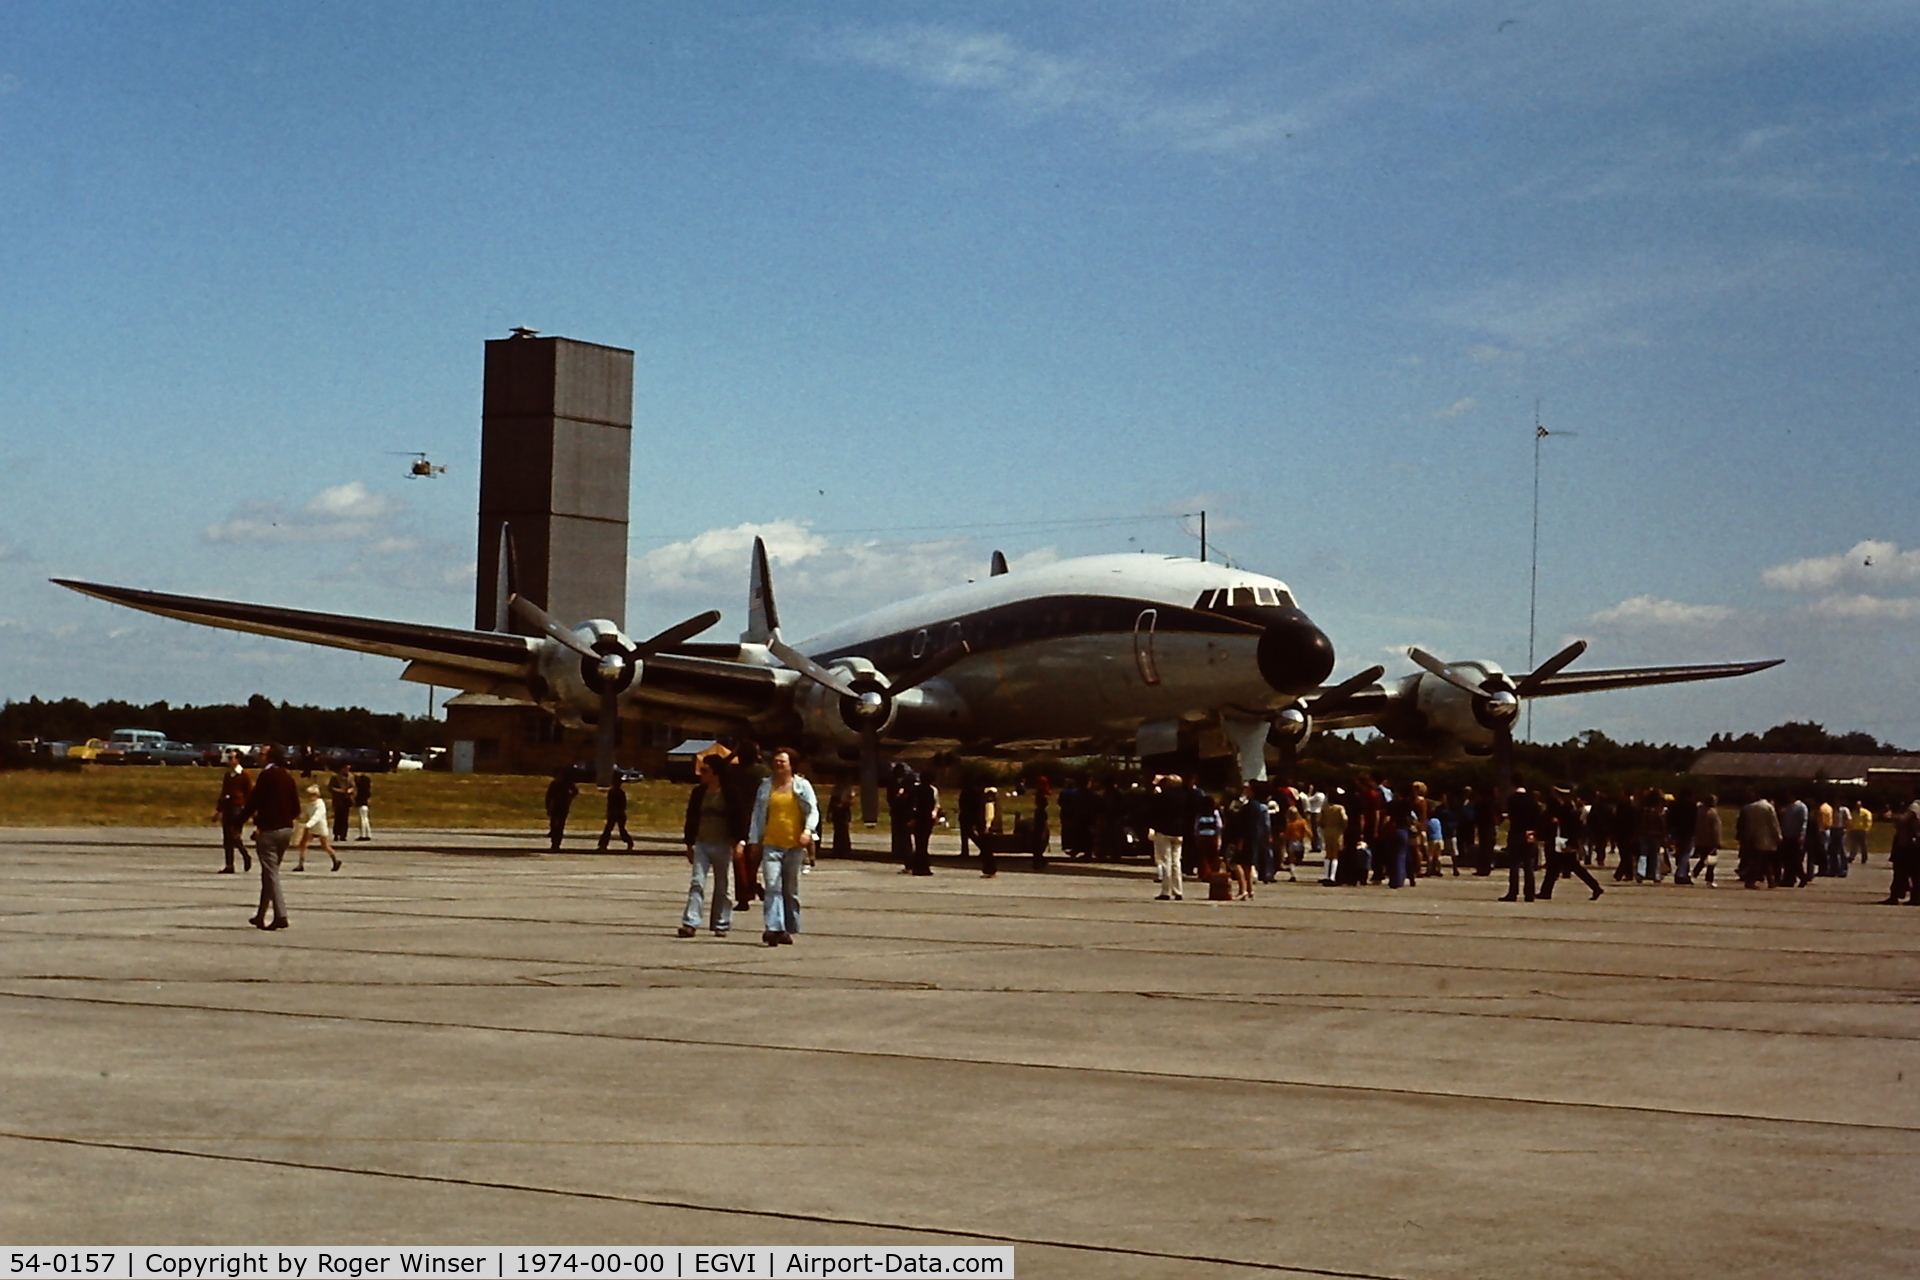 54-0157, 1955 Lockheed L-1049F Super Constellation C/N 4176, USAF/ANG aircraft seen at RAF Greenham Common attending the IAT in July 1974